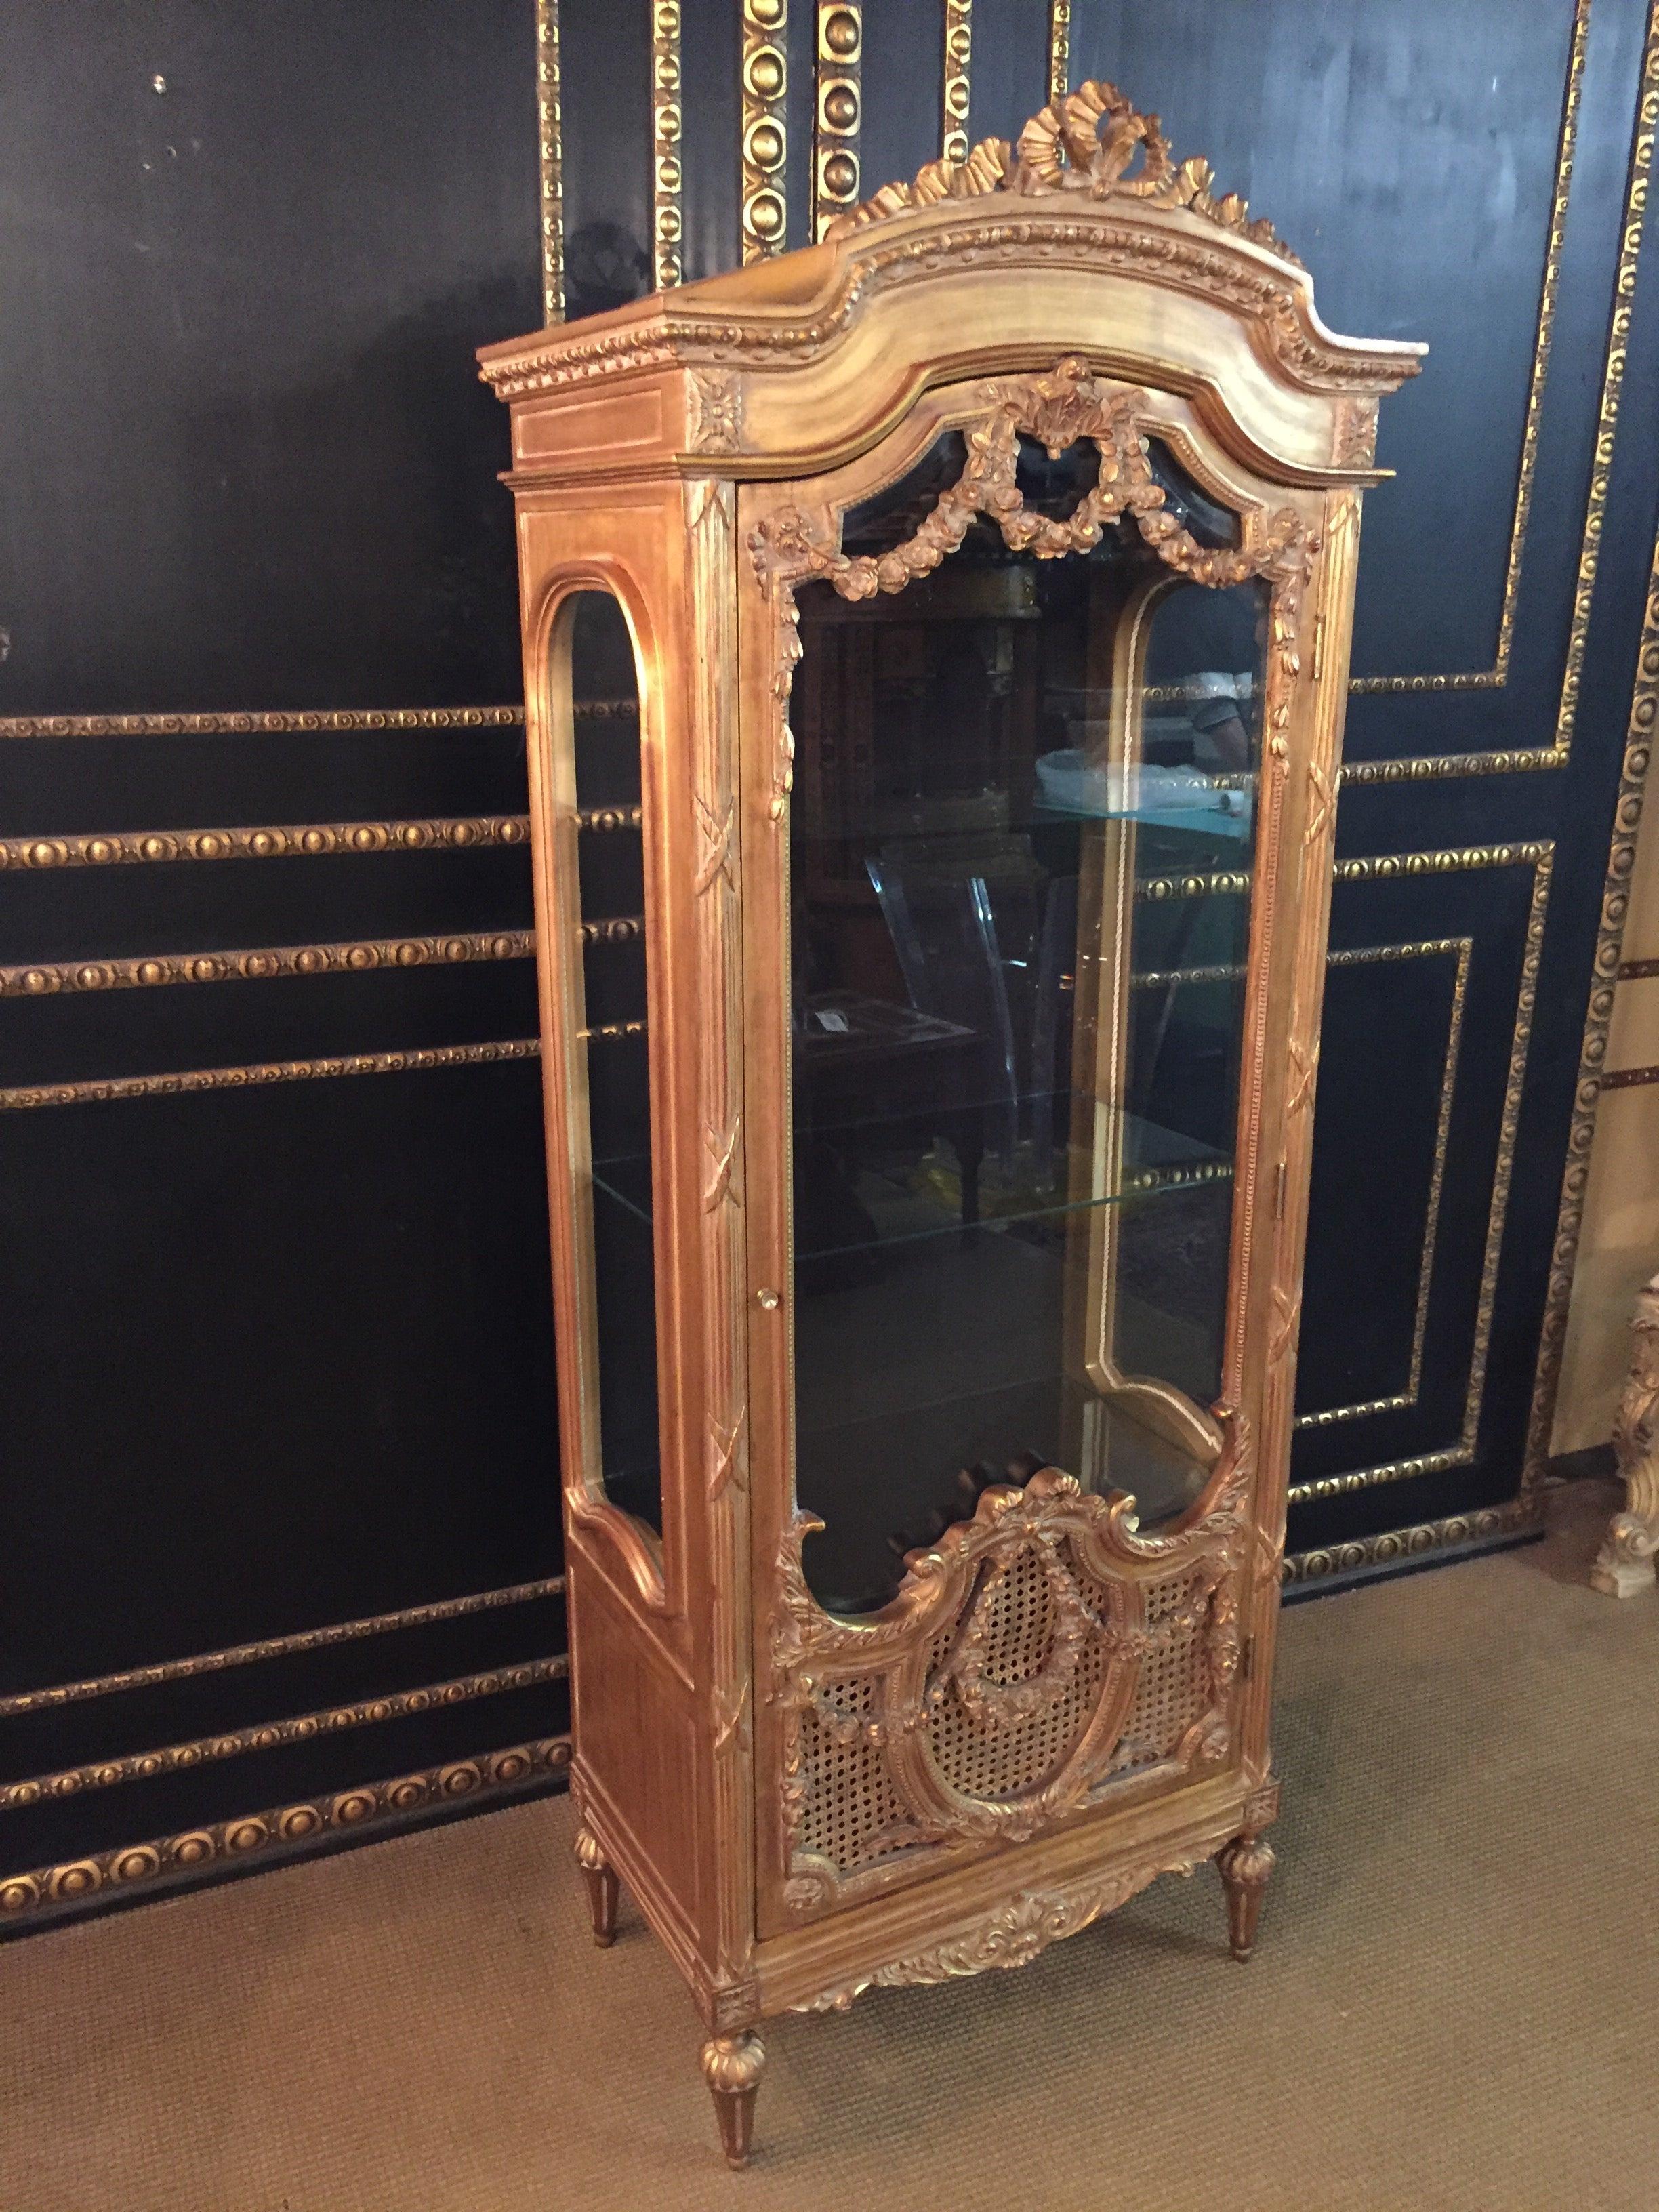 French cabinet in Louis Seize style

Solid beech, gilded. Rectangular, three-sided, faceted beveled, one-door body on conical legs. The door is partially provided with wickerwork. The front, corners and sides are decorated with carved, Classic